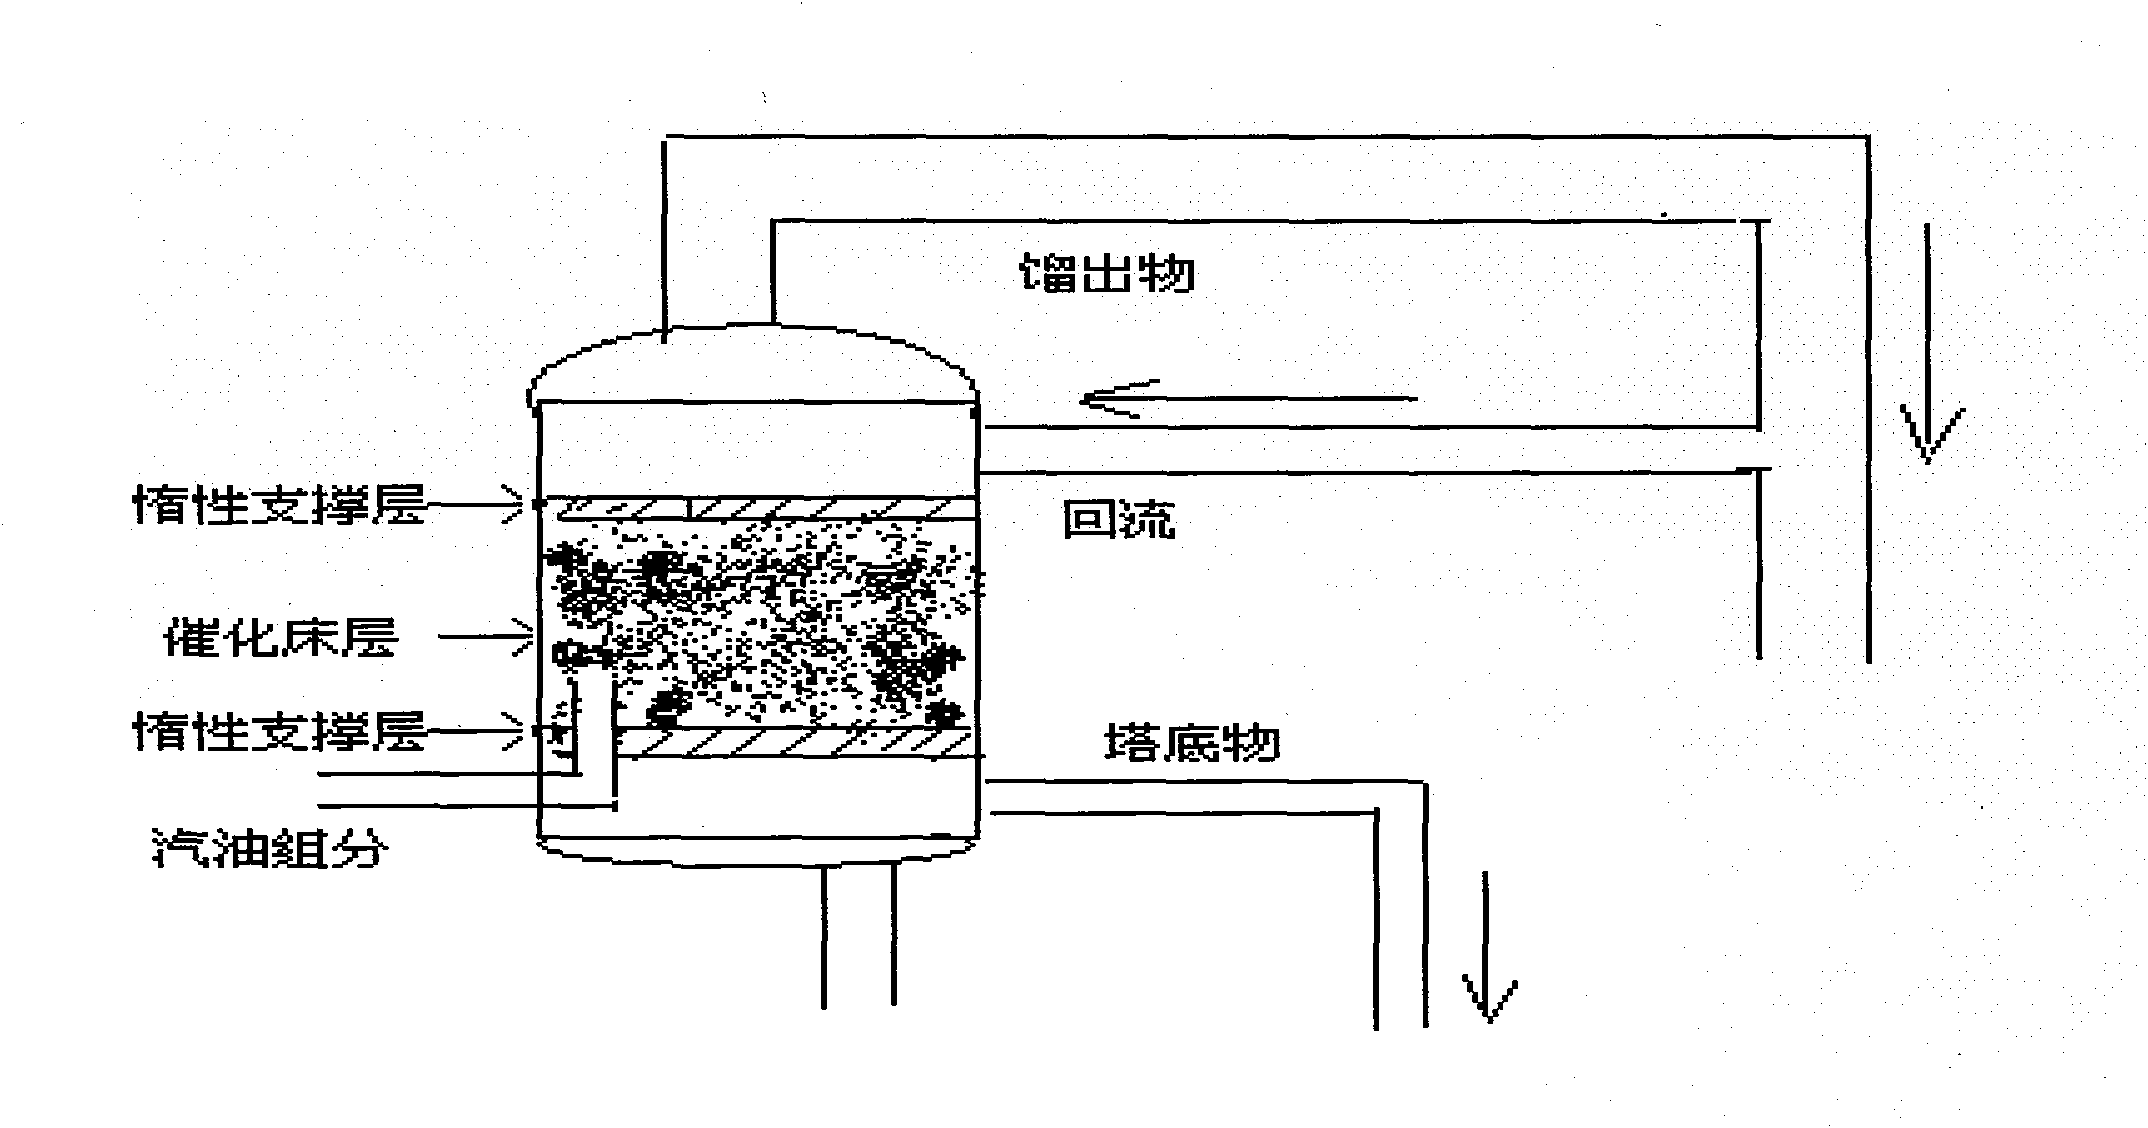 Method for removing thiophene sulfur-containing compound from petroleum